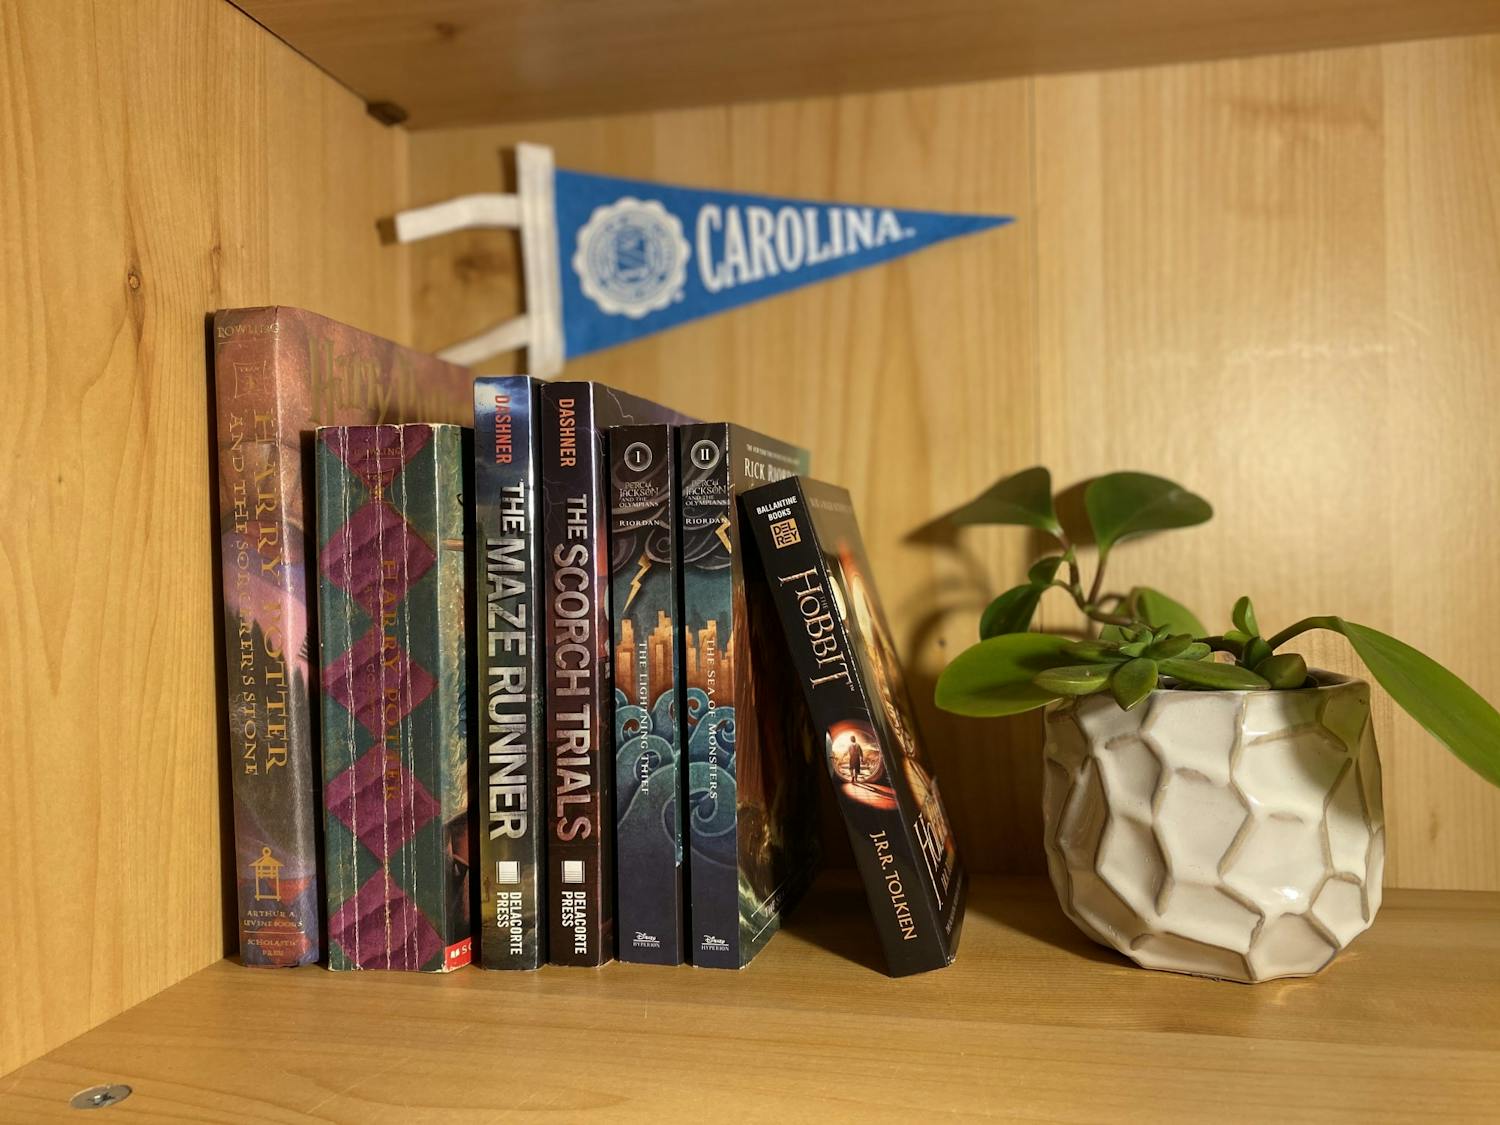 With many UNC students being sent home due to COVID, some have been revisiting their favorite childhood books, including The Maze Runner, the Percy Jackson series, and the Harry Potter series.